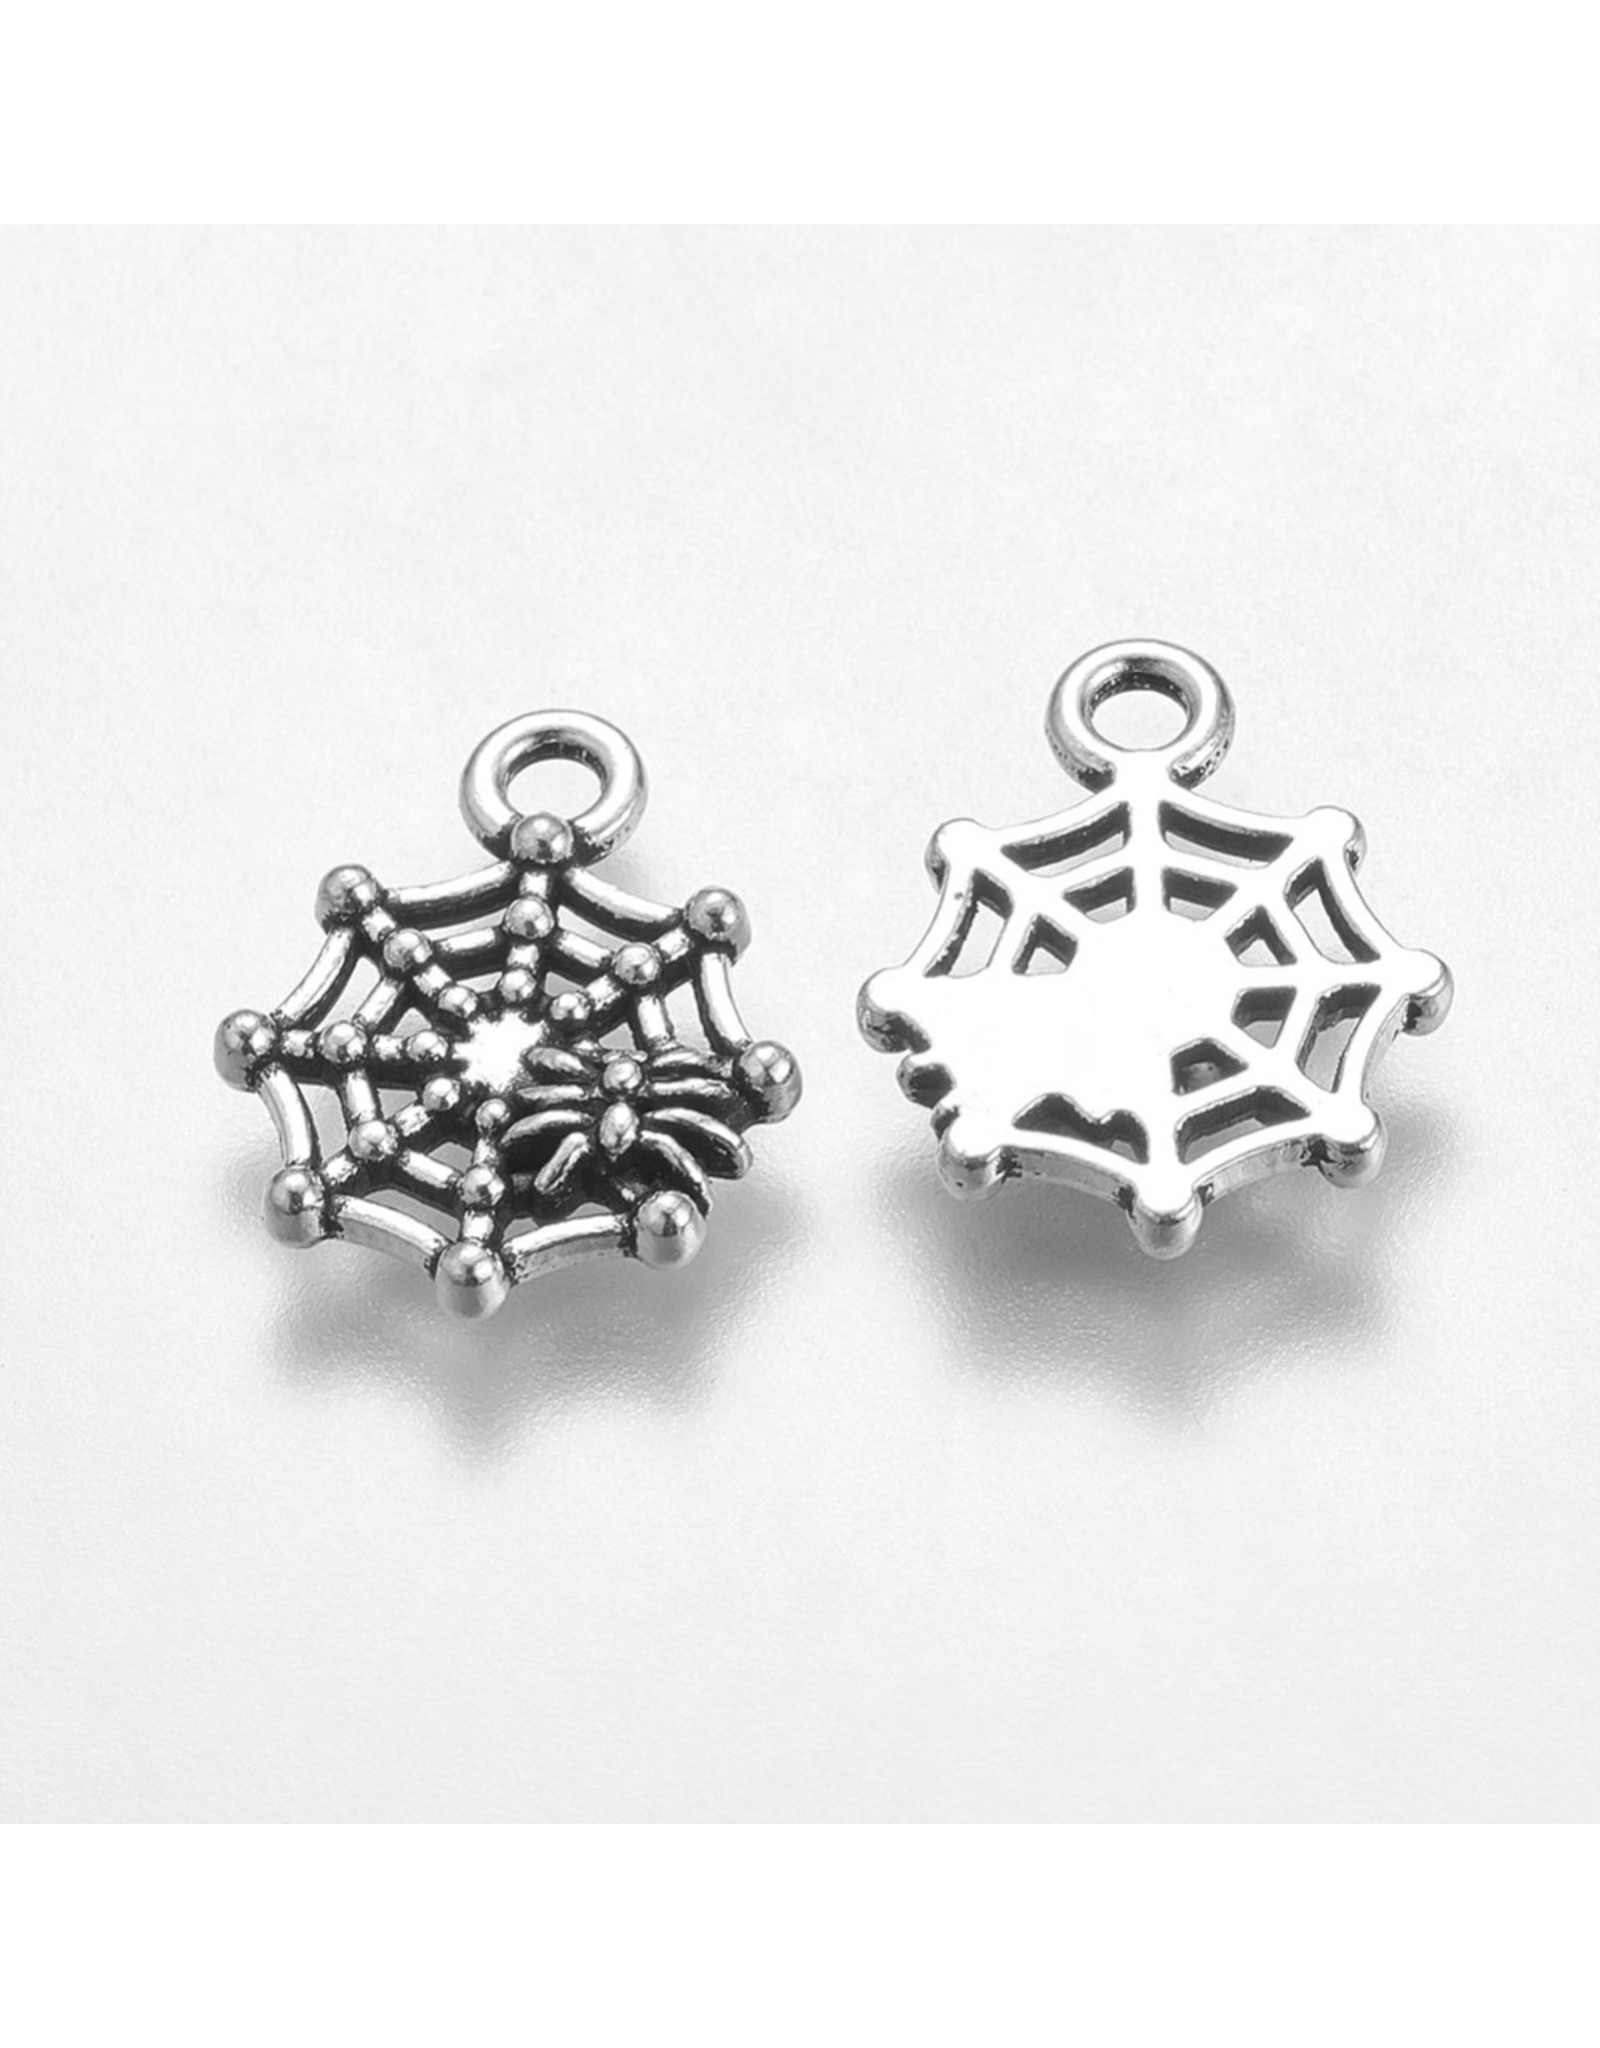 Spider and Web  17x14mm  Antique Silver   x10  NF